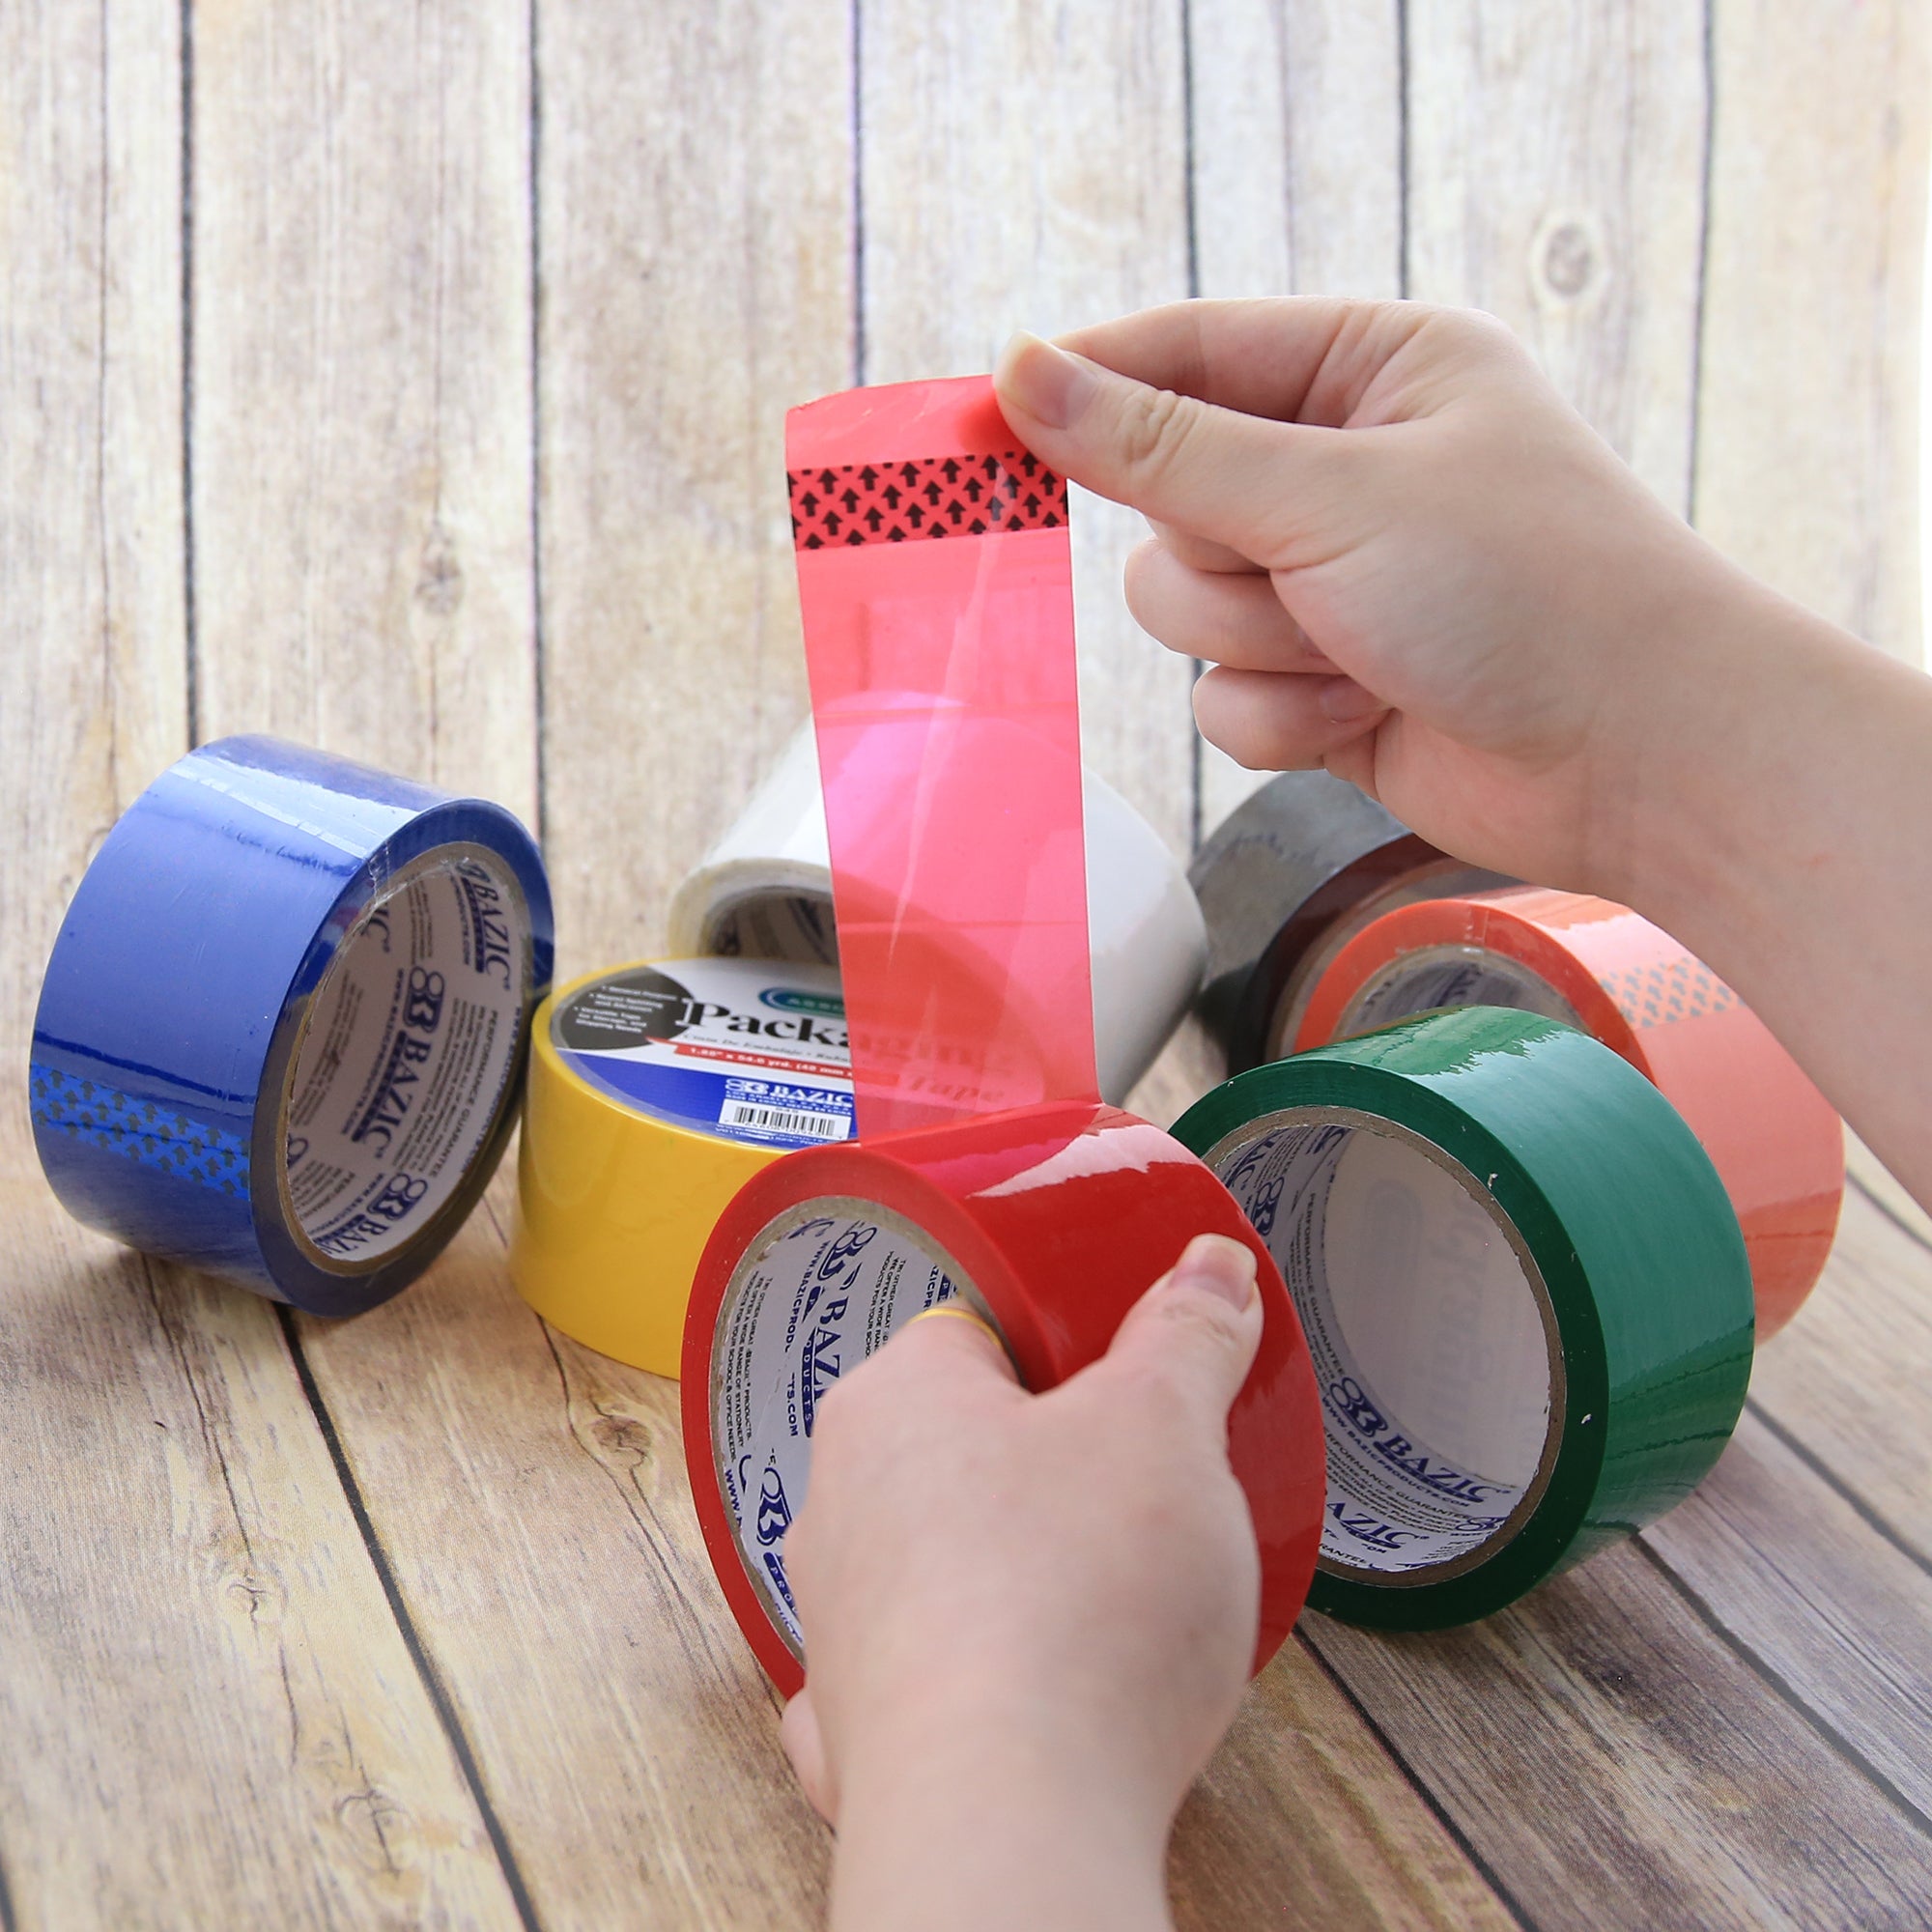 Masking Tape Vibrant Rainbow Colored Painters Tape Great for Arts & Crafts,  Labeling and Color-Coding - China Packing Tape, Adhesive Tape